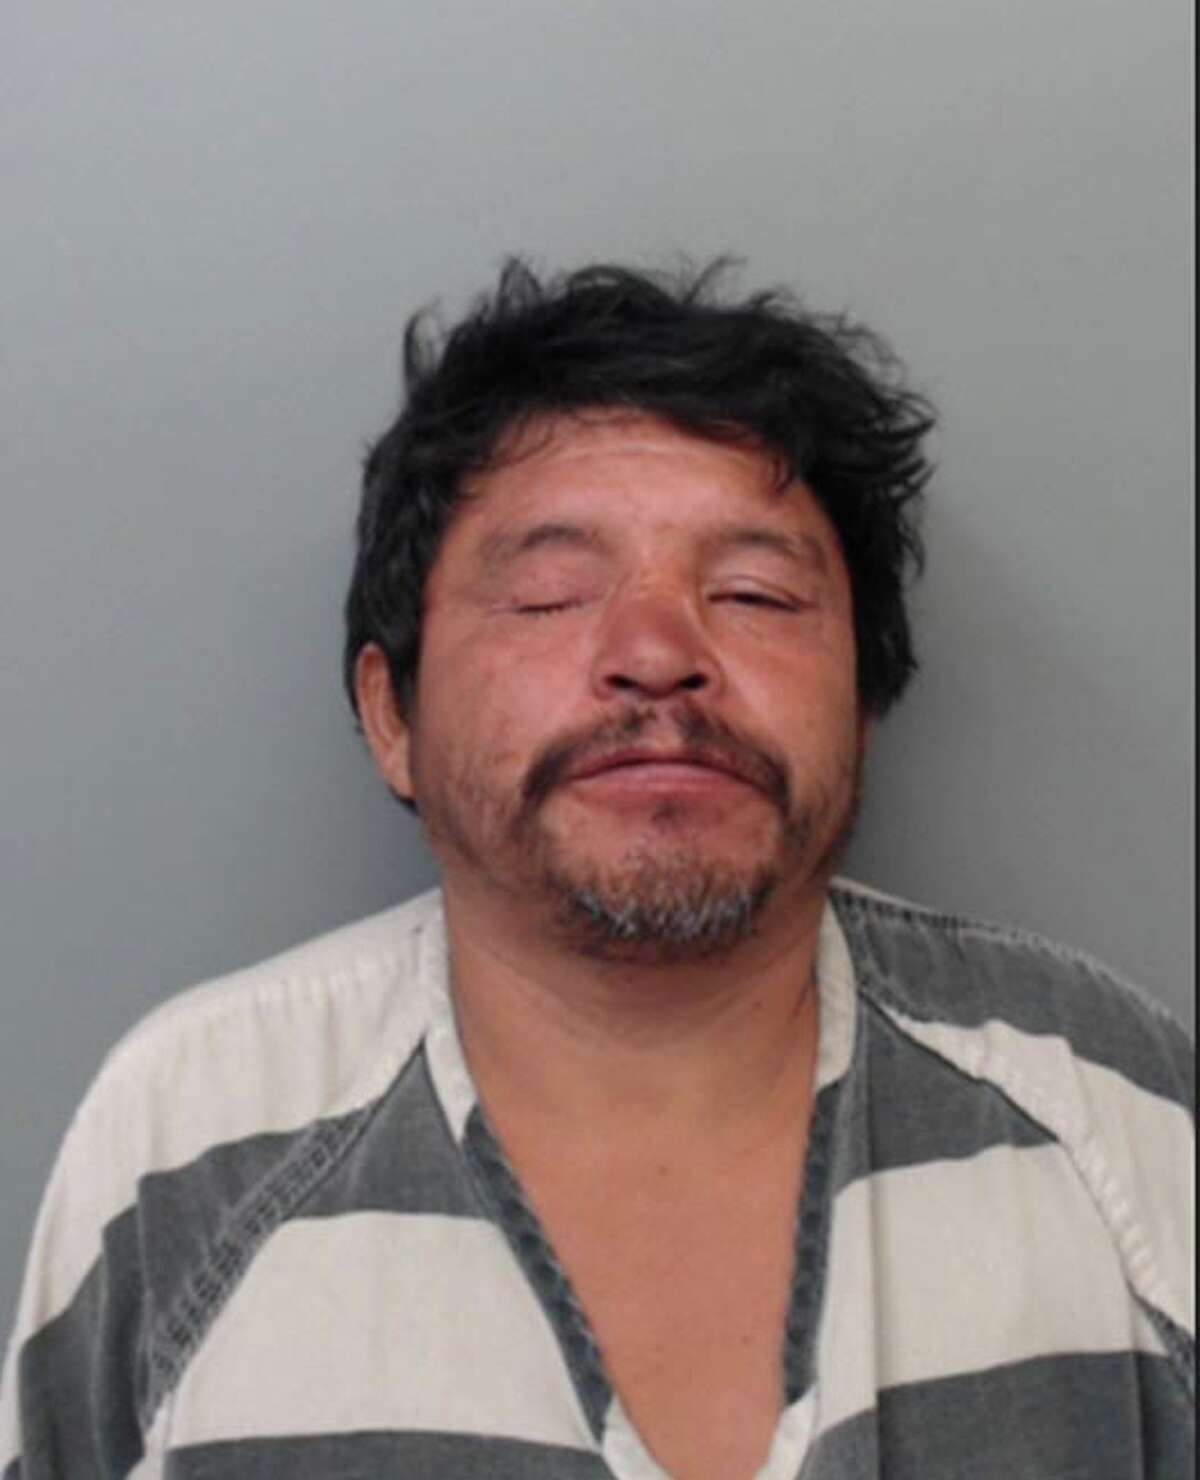 Raul Mendoza, 46, was charged with assault, family violence and aggravated assault with a knife or cutting instrument.